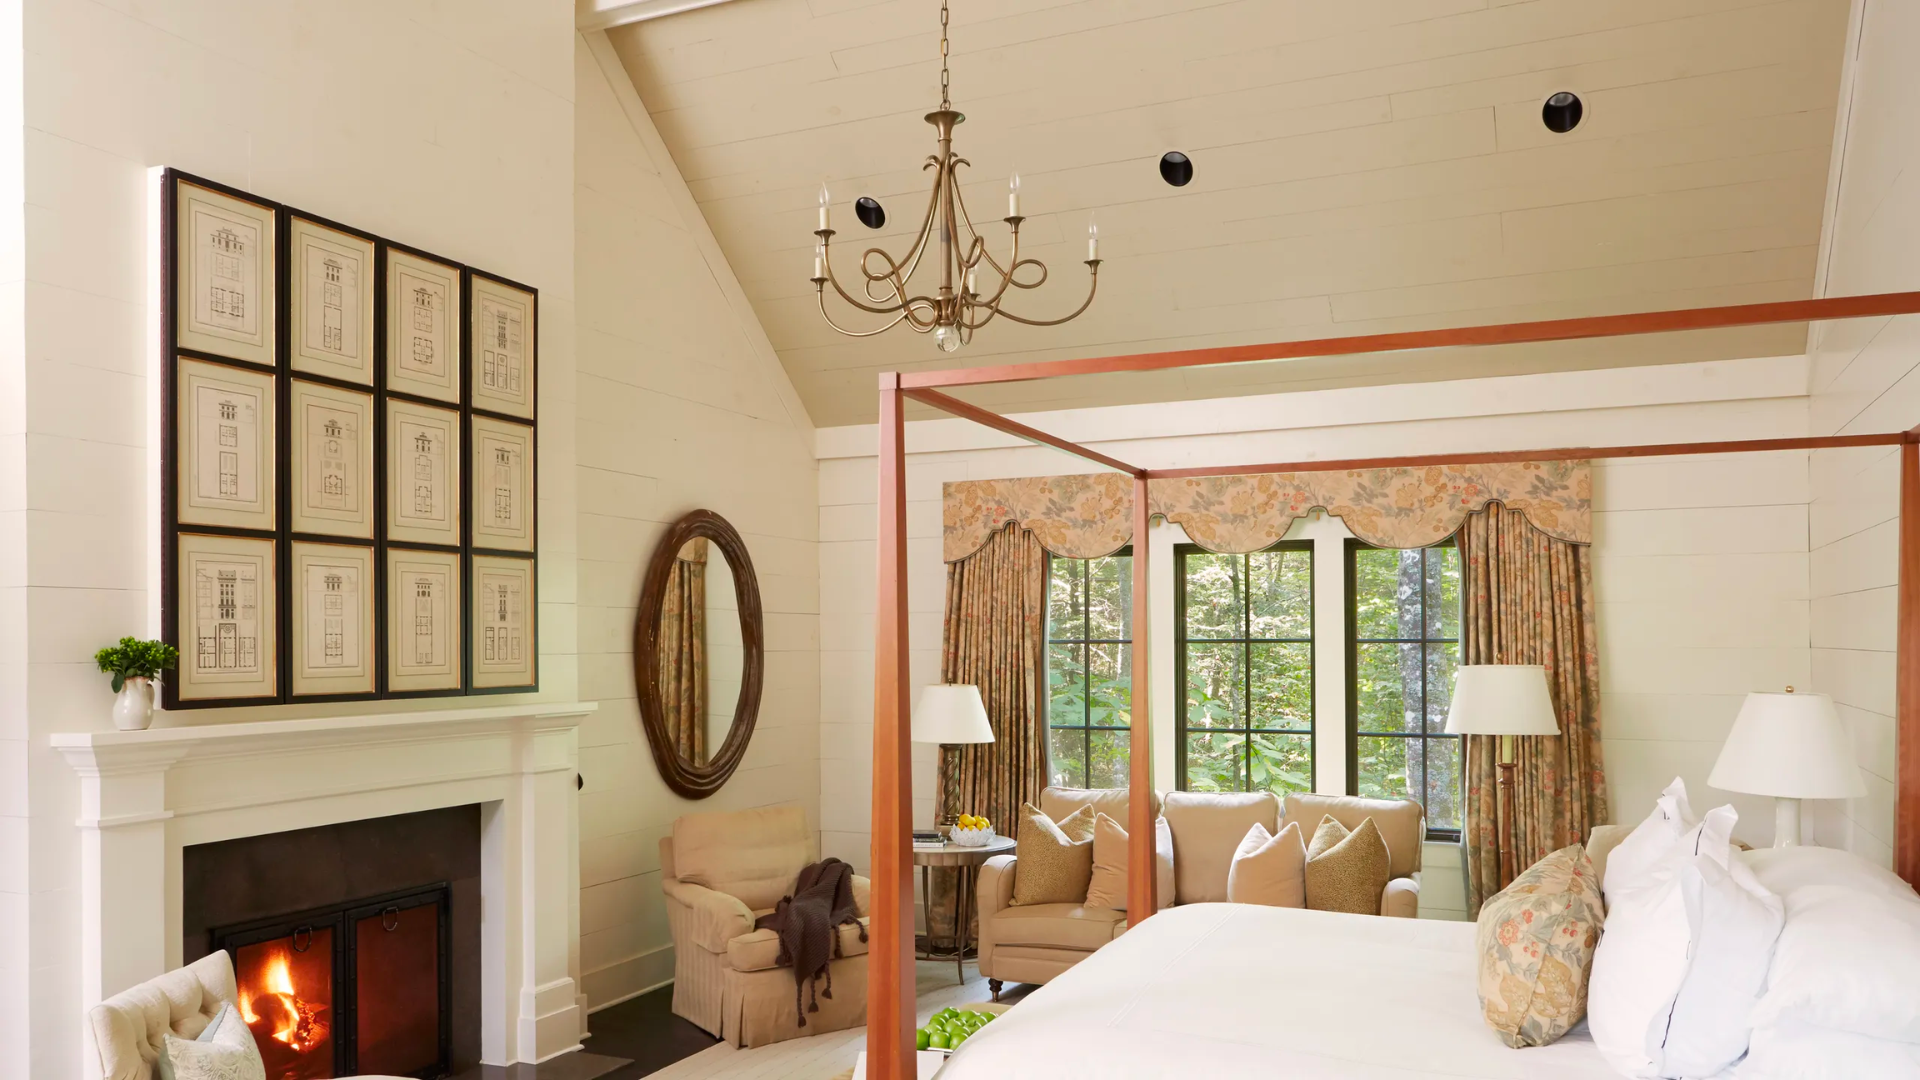 Luxury retreat bedroom with fireplace and four poster bed.